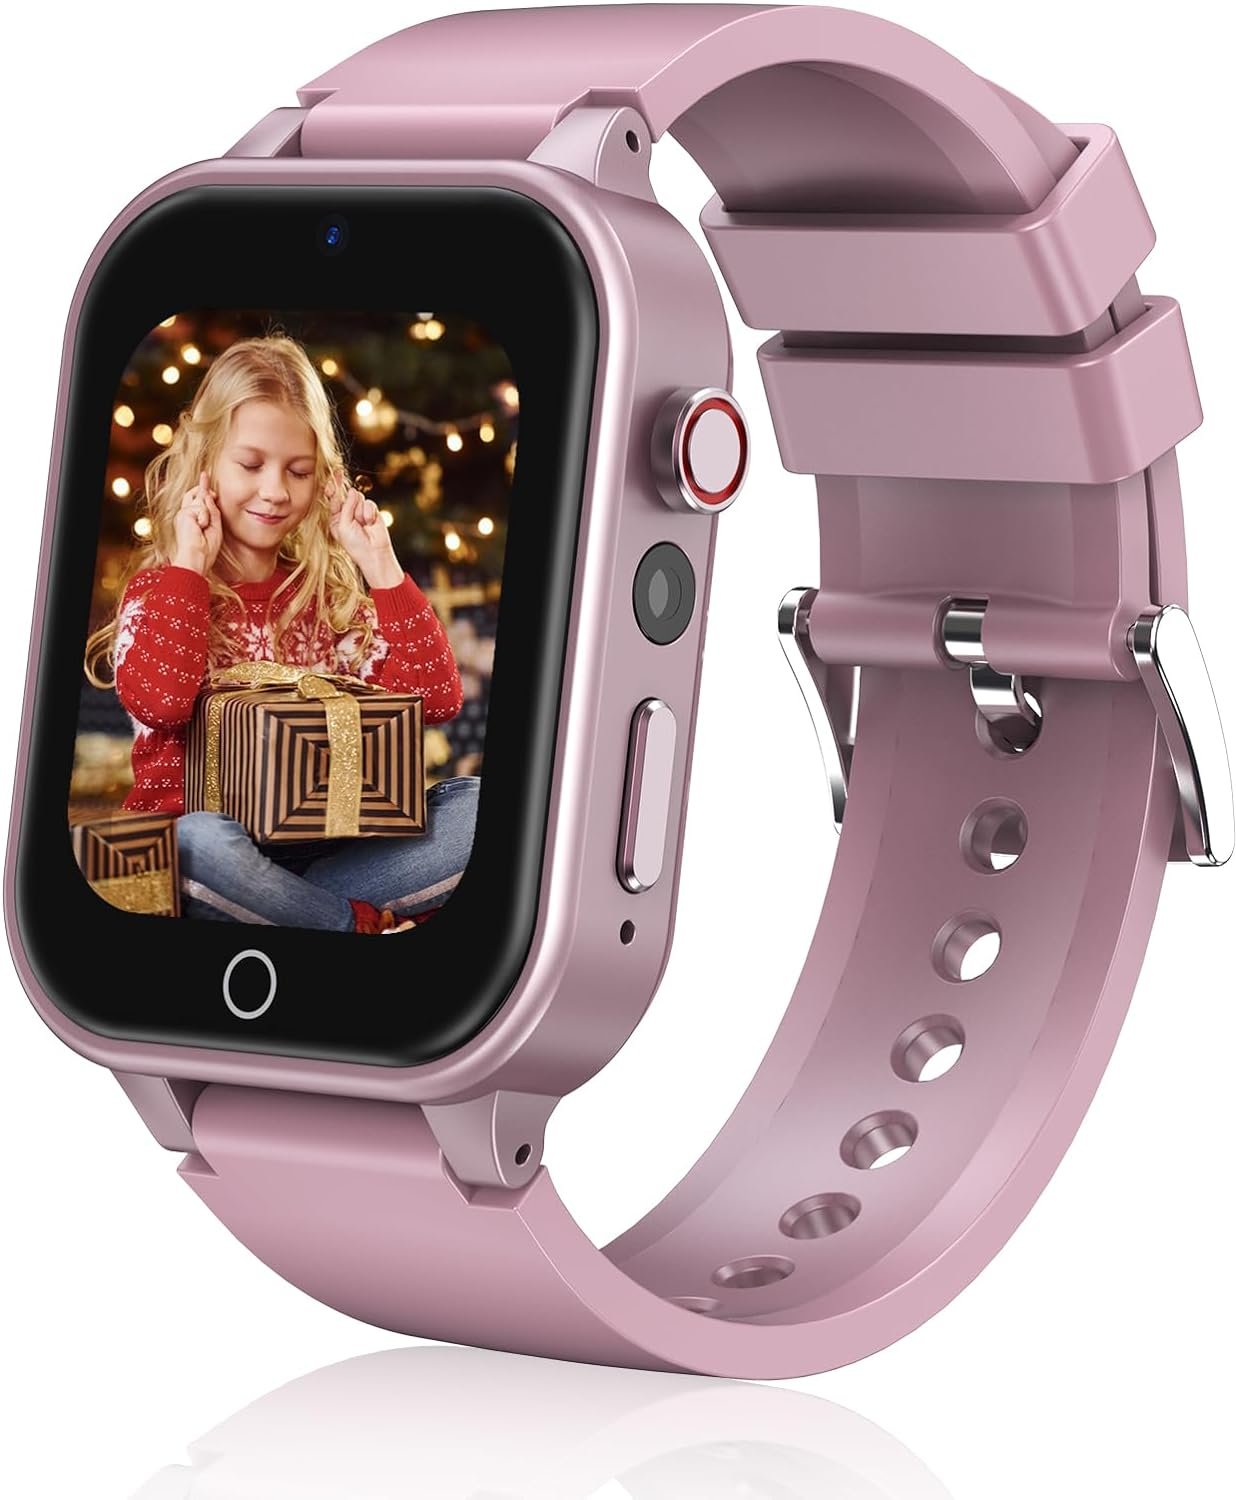 Kids Smart Watch with 26 Puzzle Games Review